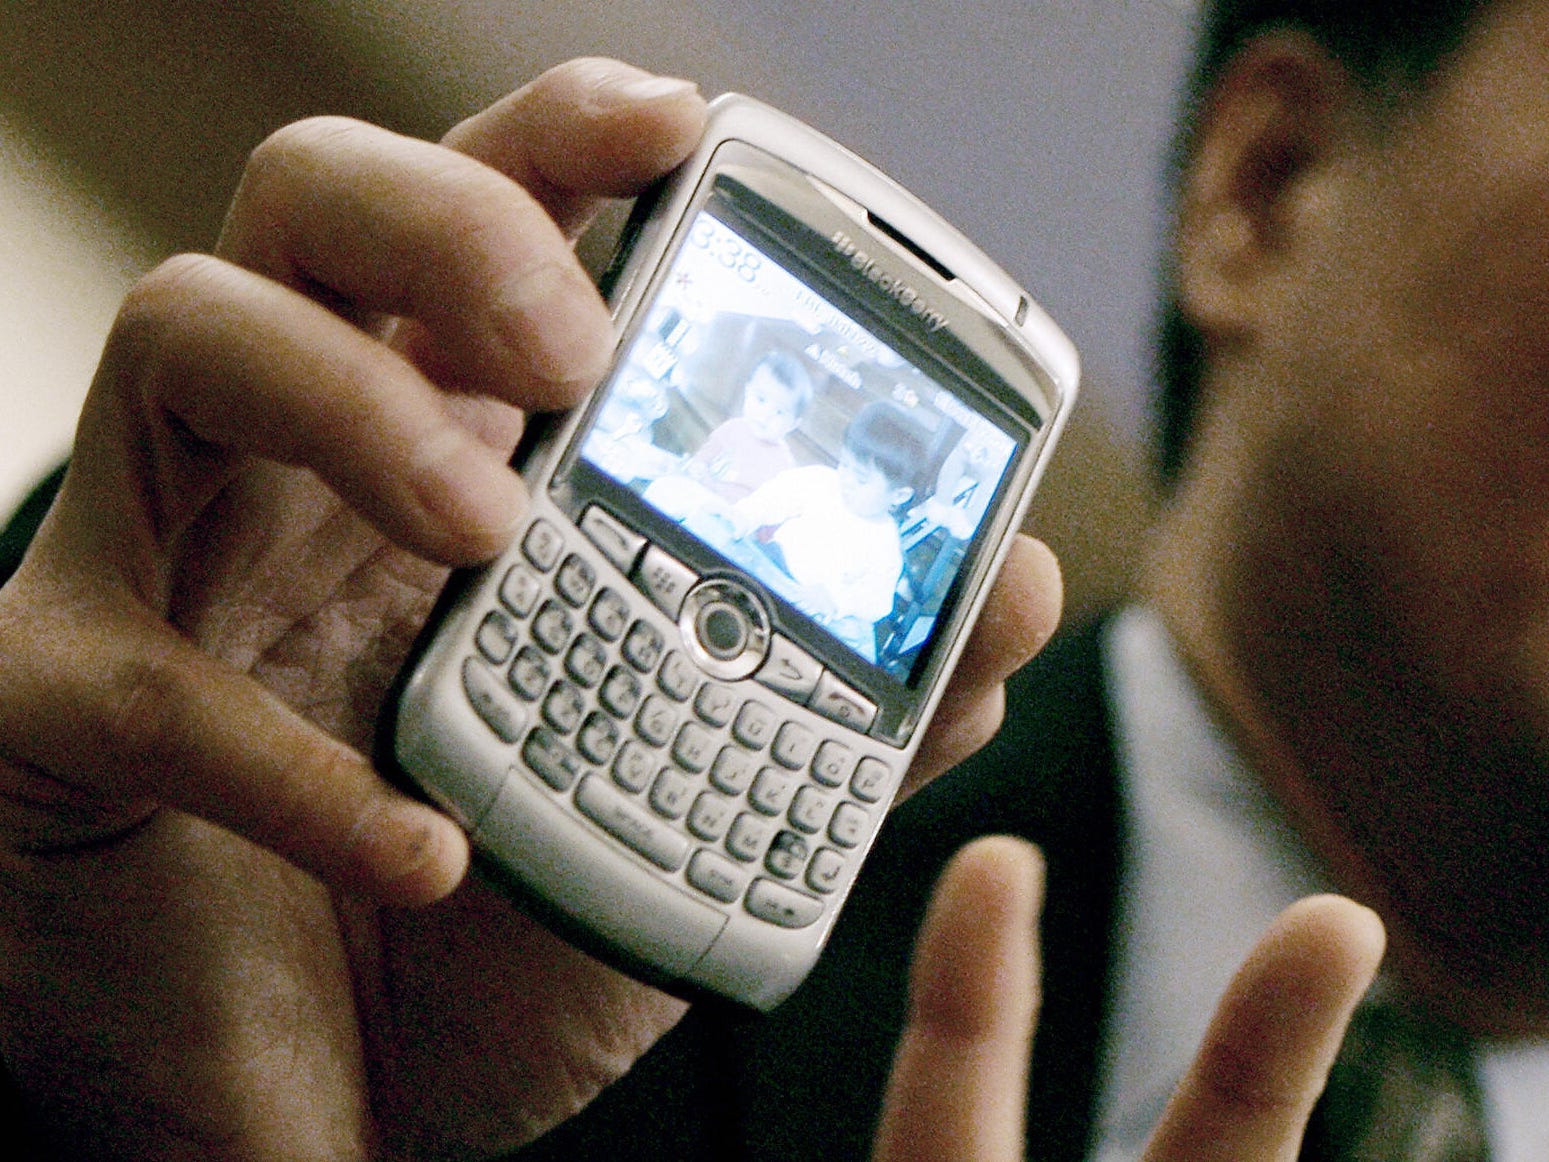 Man holds up a silver Blackberry phone